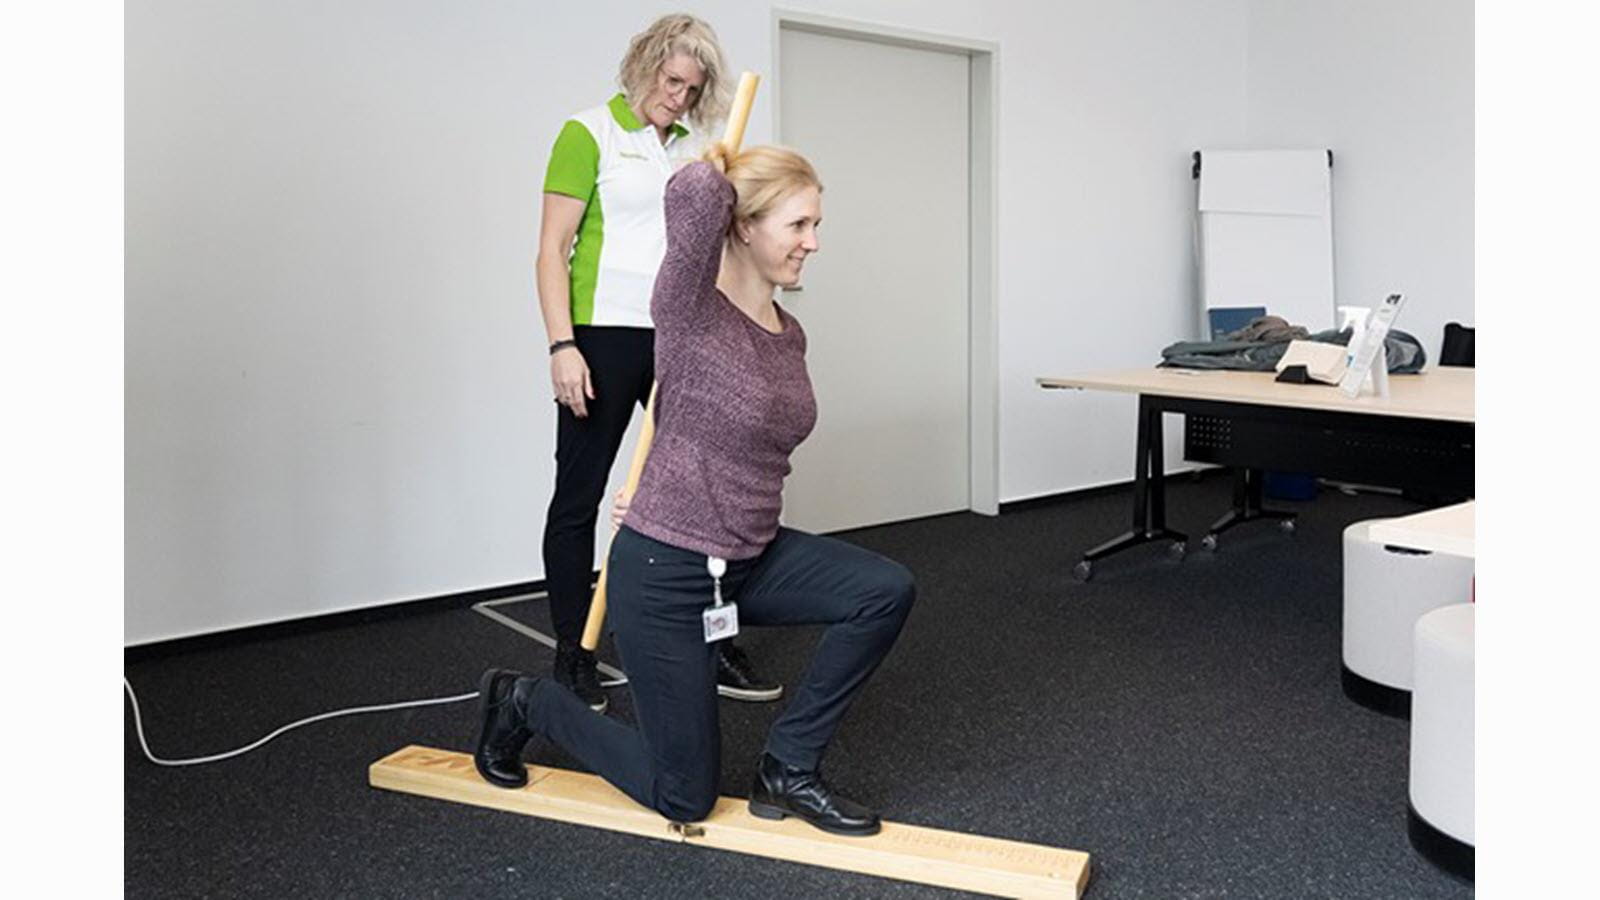 A therapist checks an employee's functional strength and flexibility while the employee is on one knee with one arm raised behind her head.